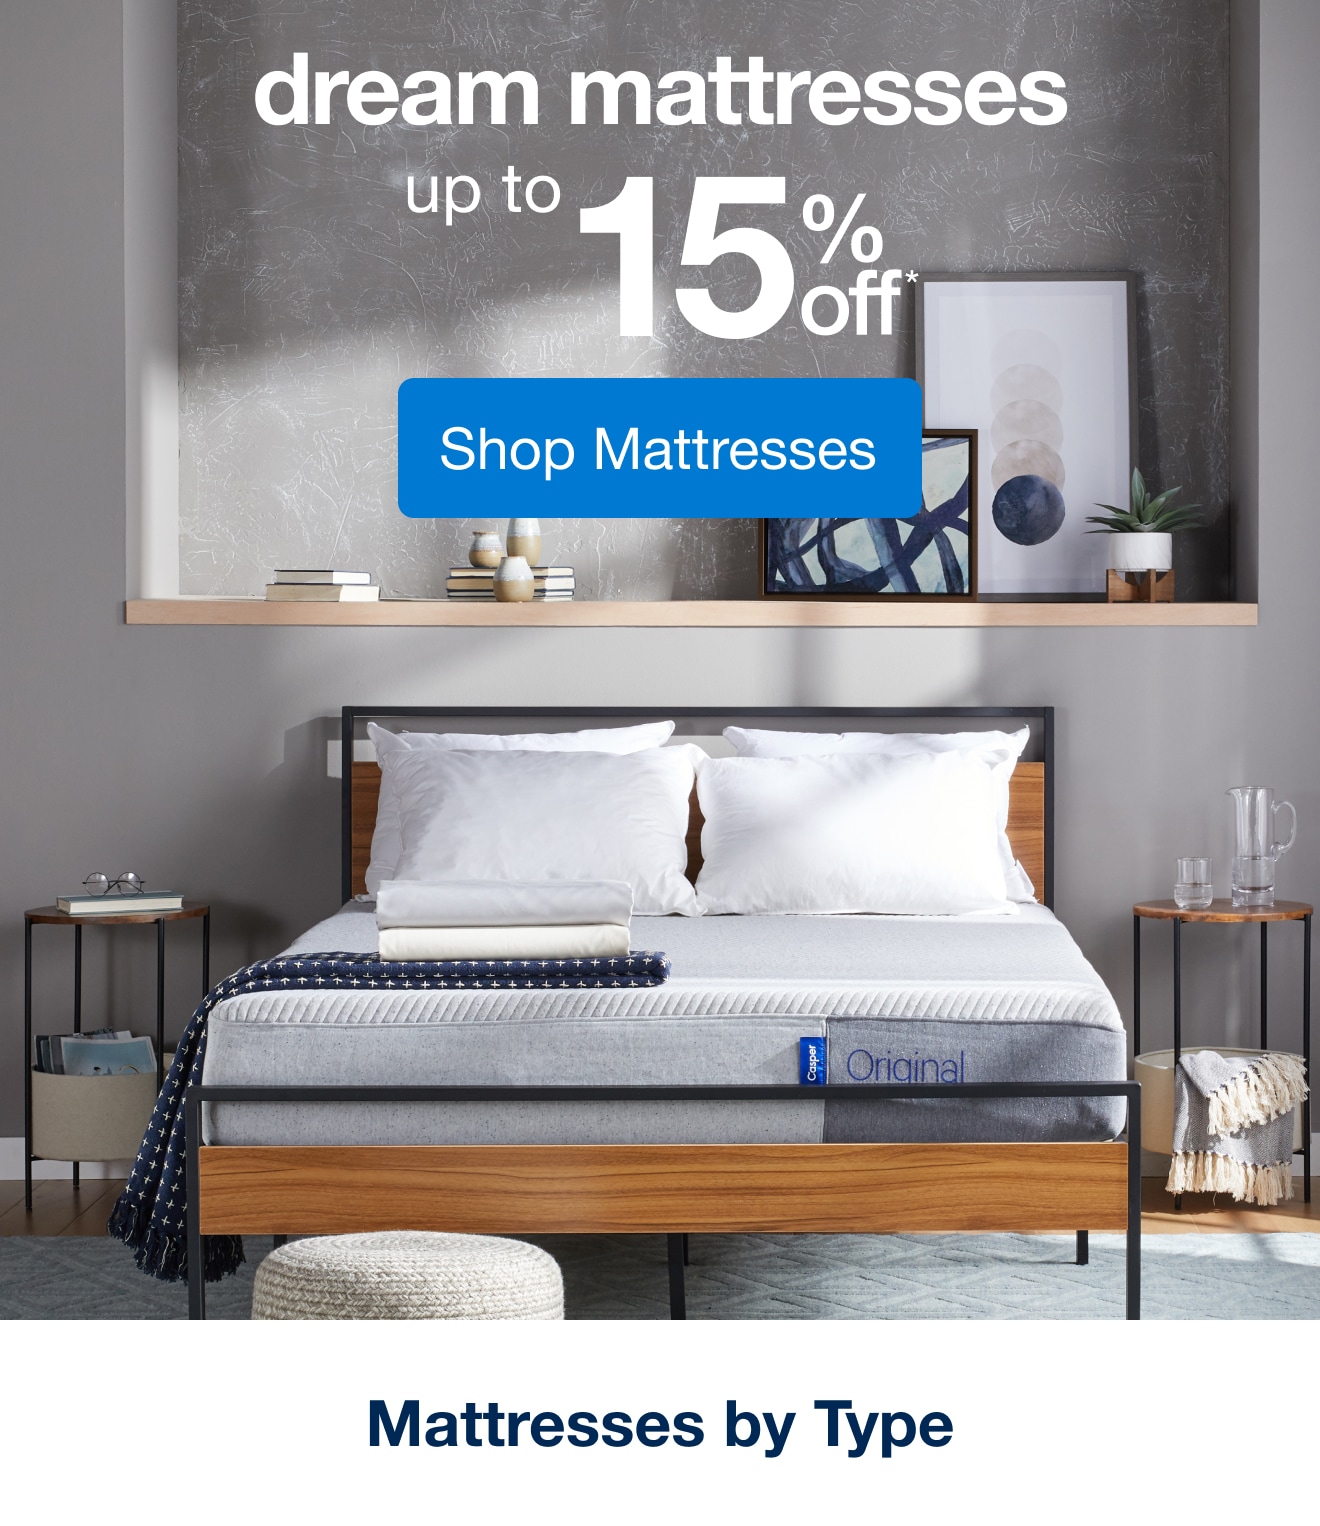 Up to 15% off - Shop Mattresses